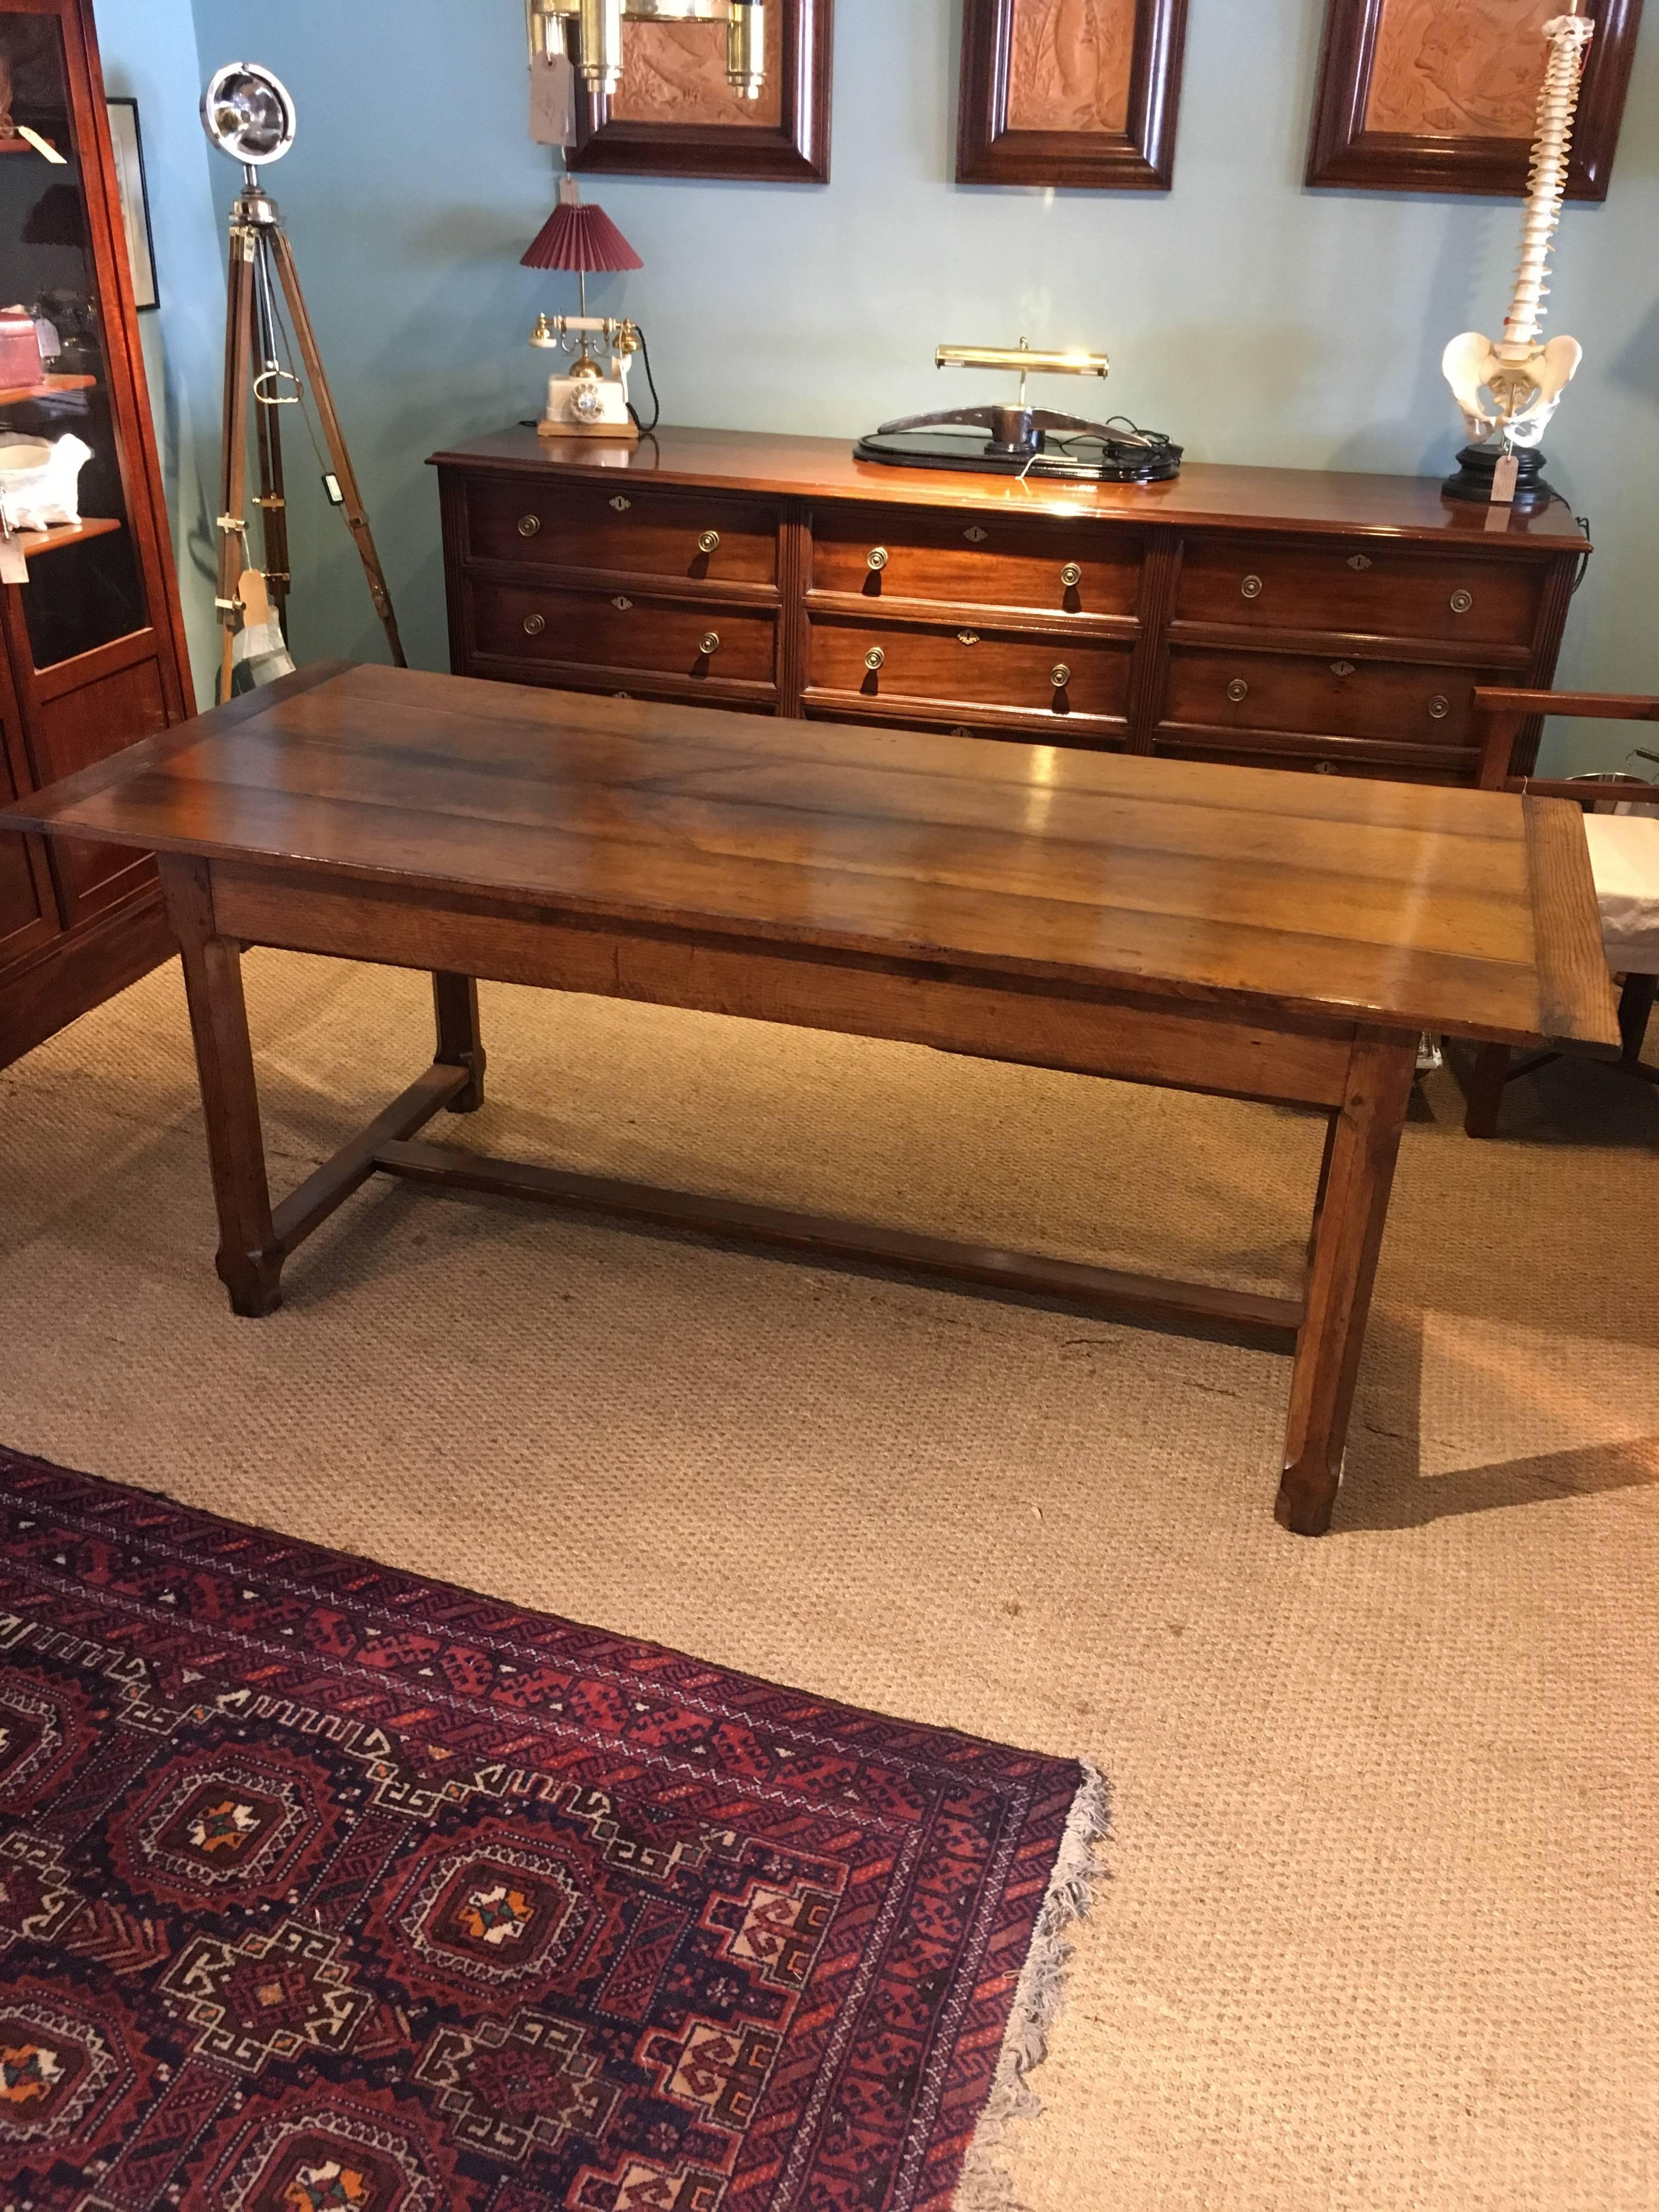 Good 19th century oak farmhouse table, lovely colour patina

Large drawer each end of the table, dating to around the 1850s , generous overhang on the ends of 8 inches

Measures: L 79 inches or 200 cms
W 33 inches or 85 cms
Height 30 inches or